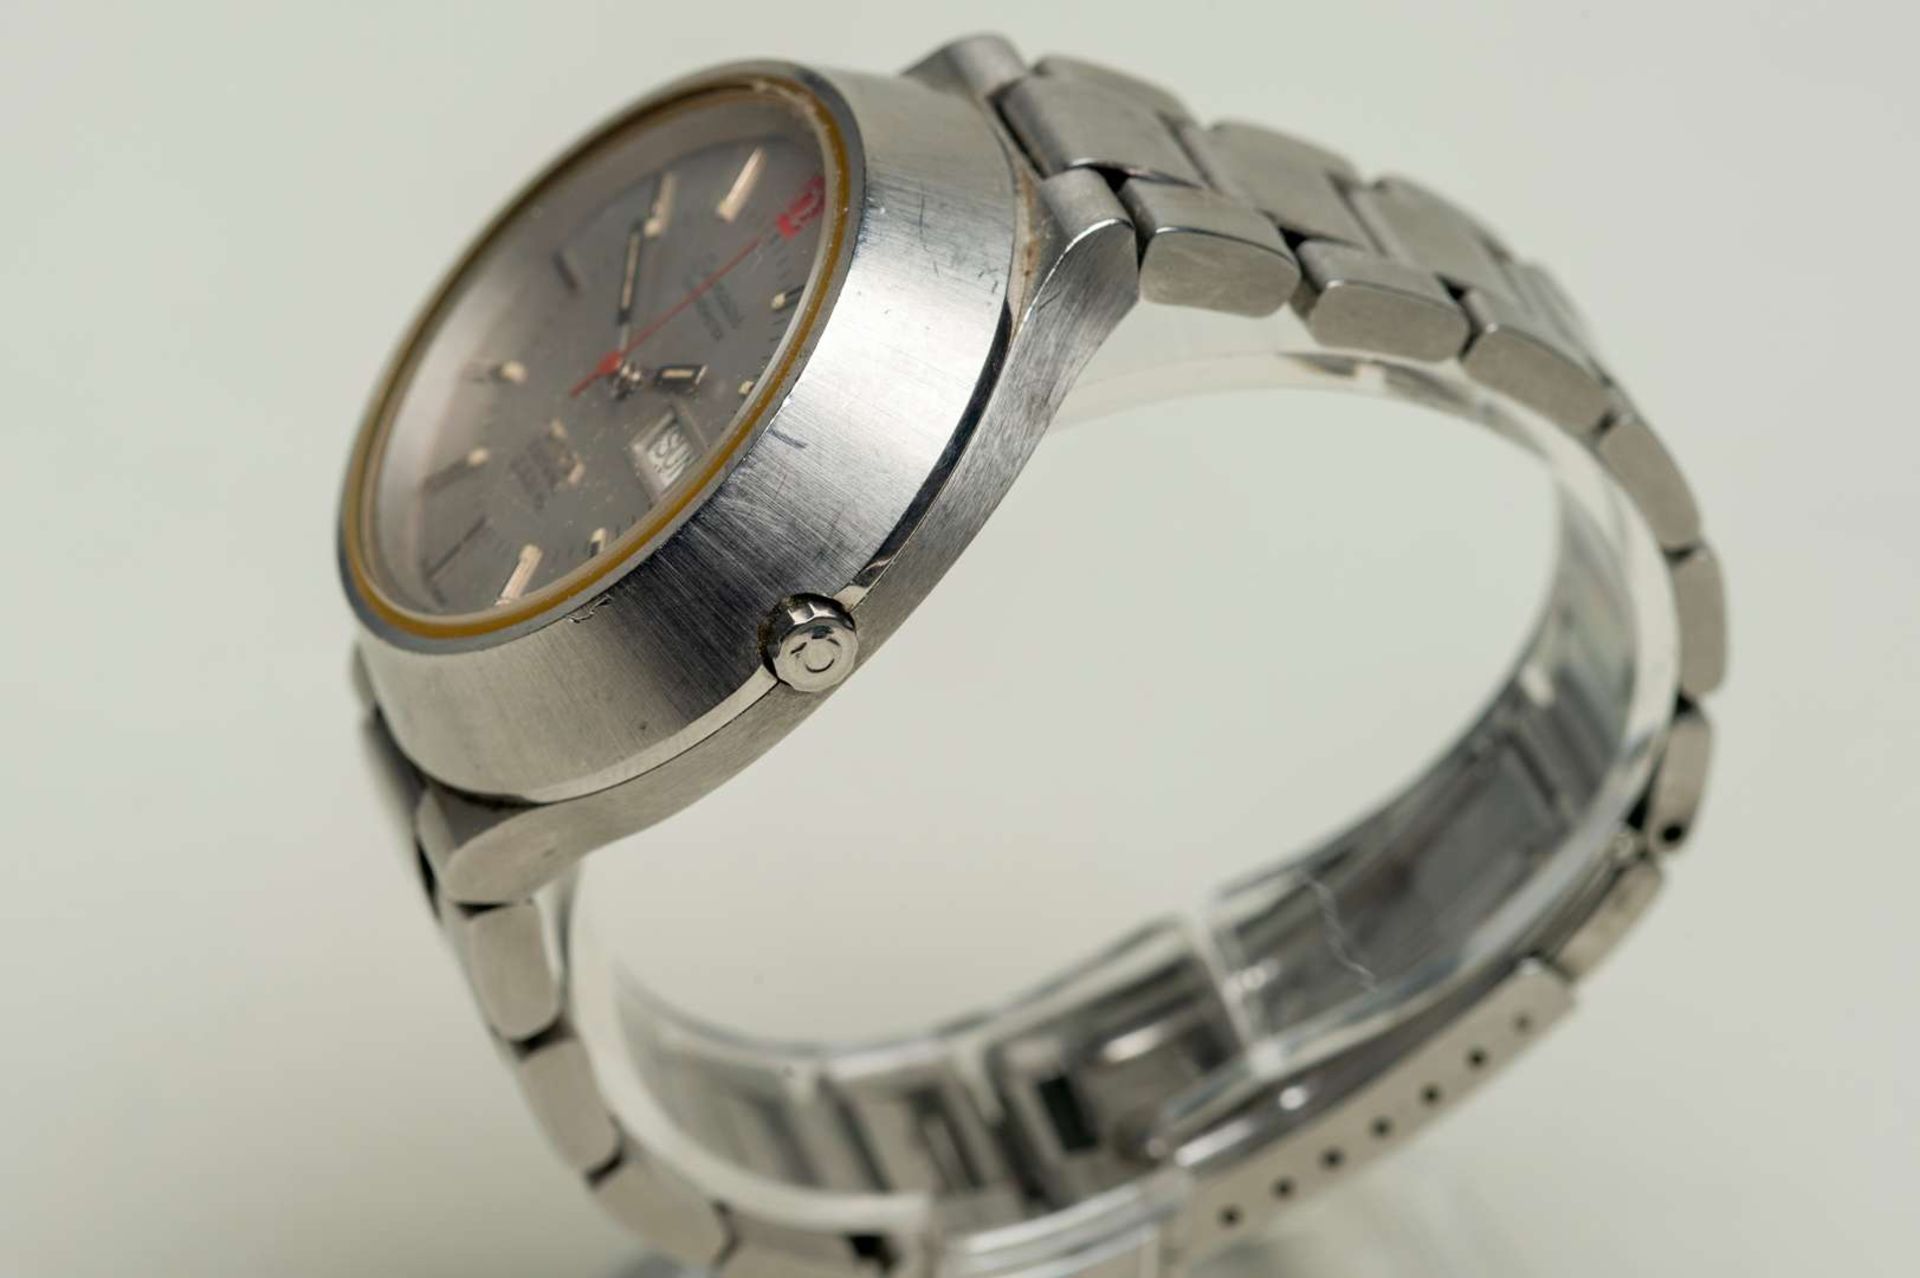 OMEGA, a 1970's Seamaster, Chronometer, Electronic f300 Hz, stainless steel day/date wristwatch. - Image 2 of 8